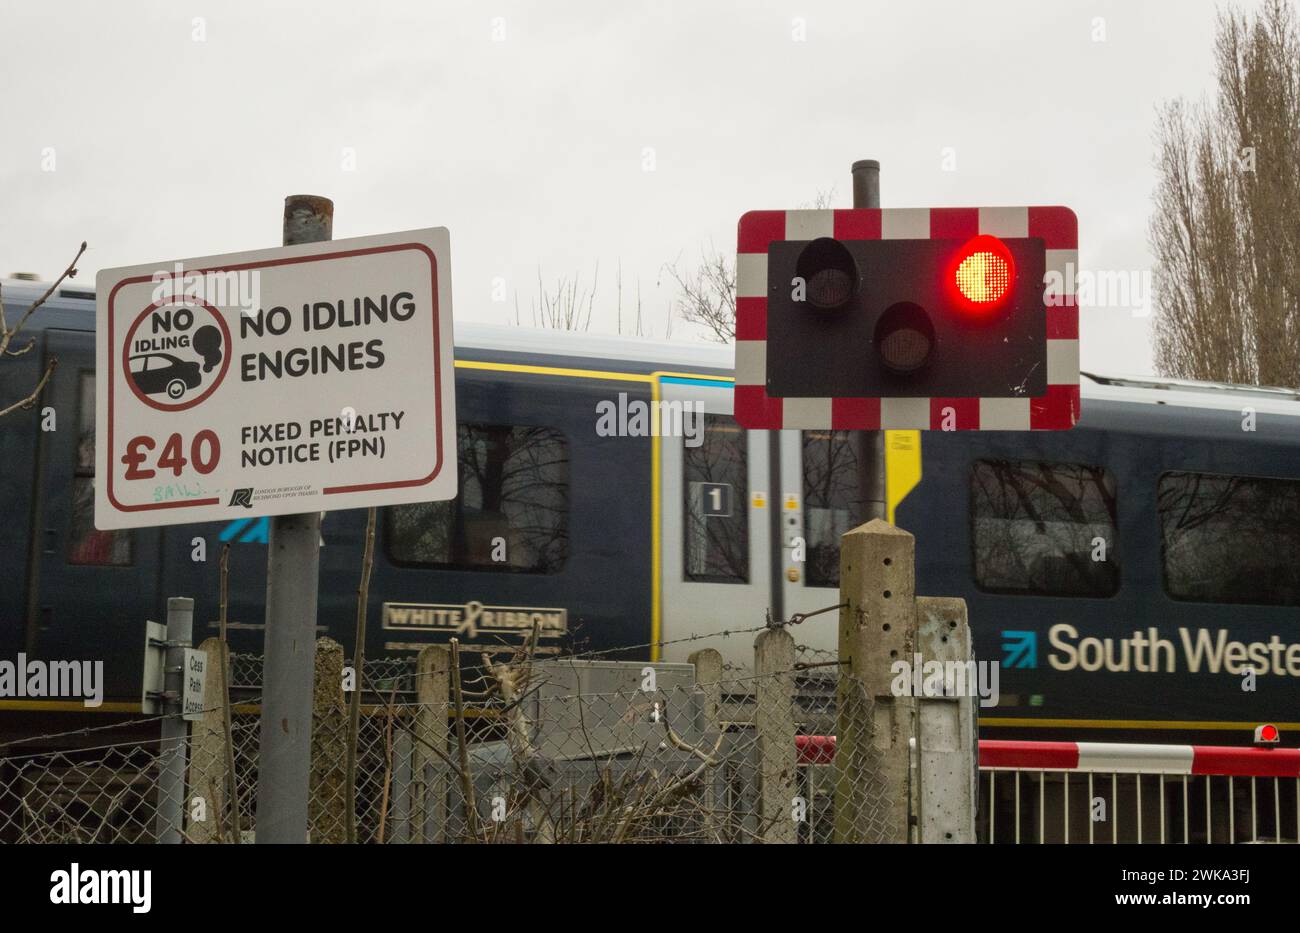 No idling engines fixed penalty notice signage at a level crossing in London, England, U.K. Stock Photo